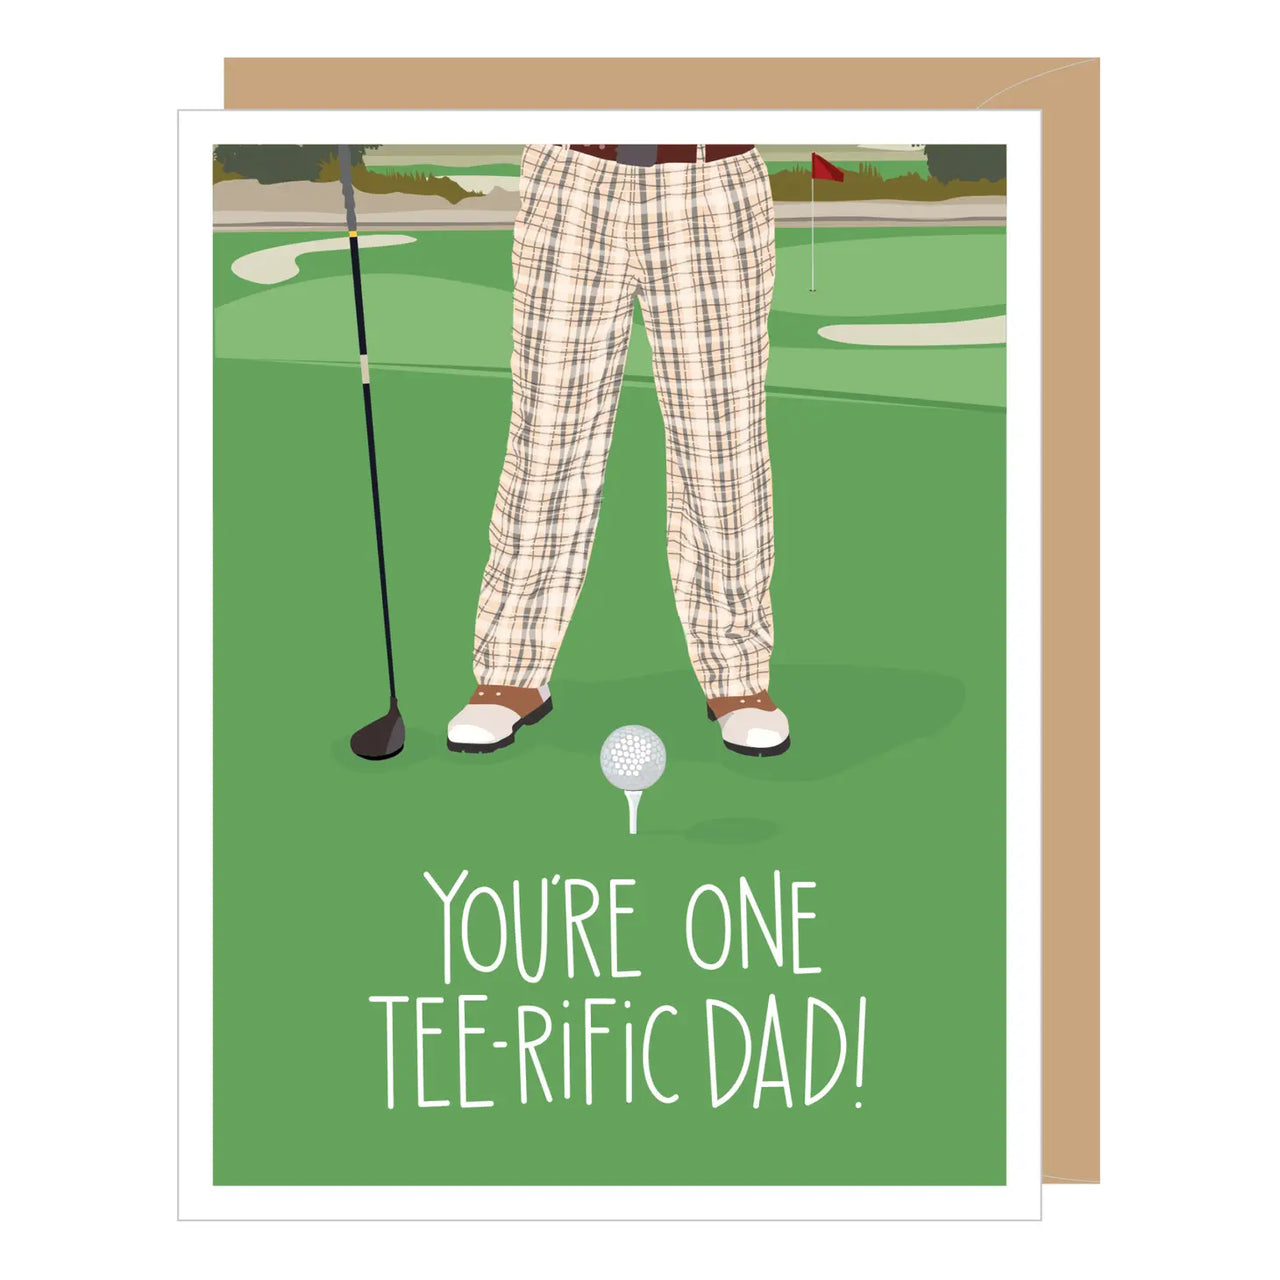 Hole in One Tee-rific Golf Father's Day Card